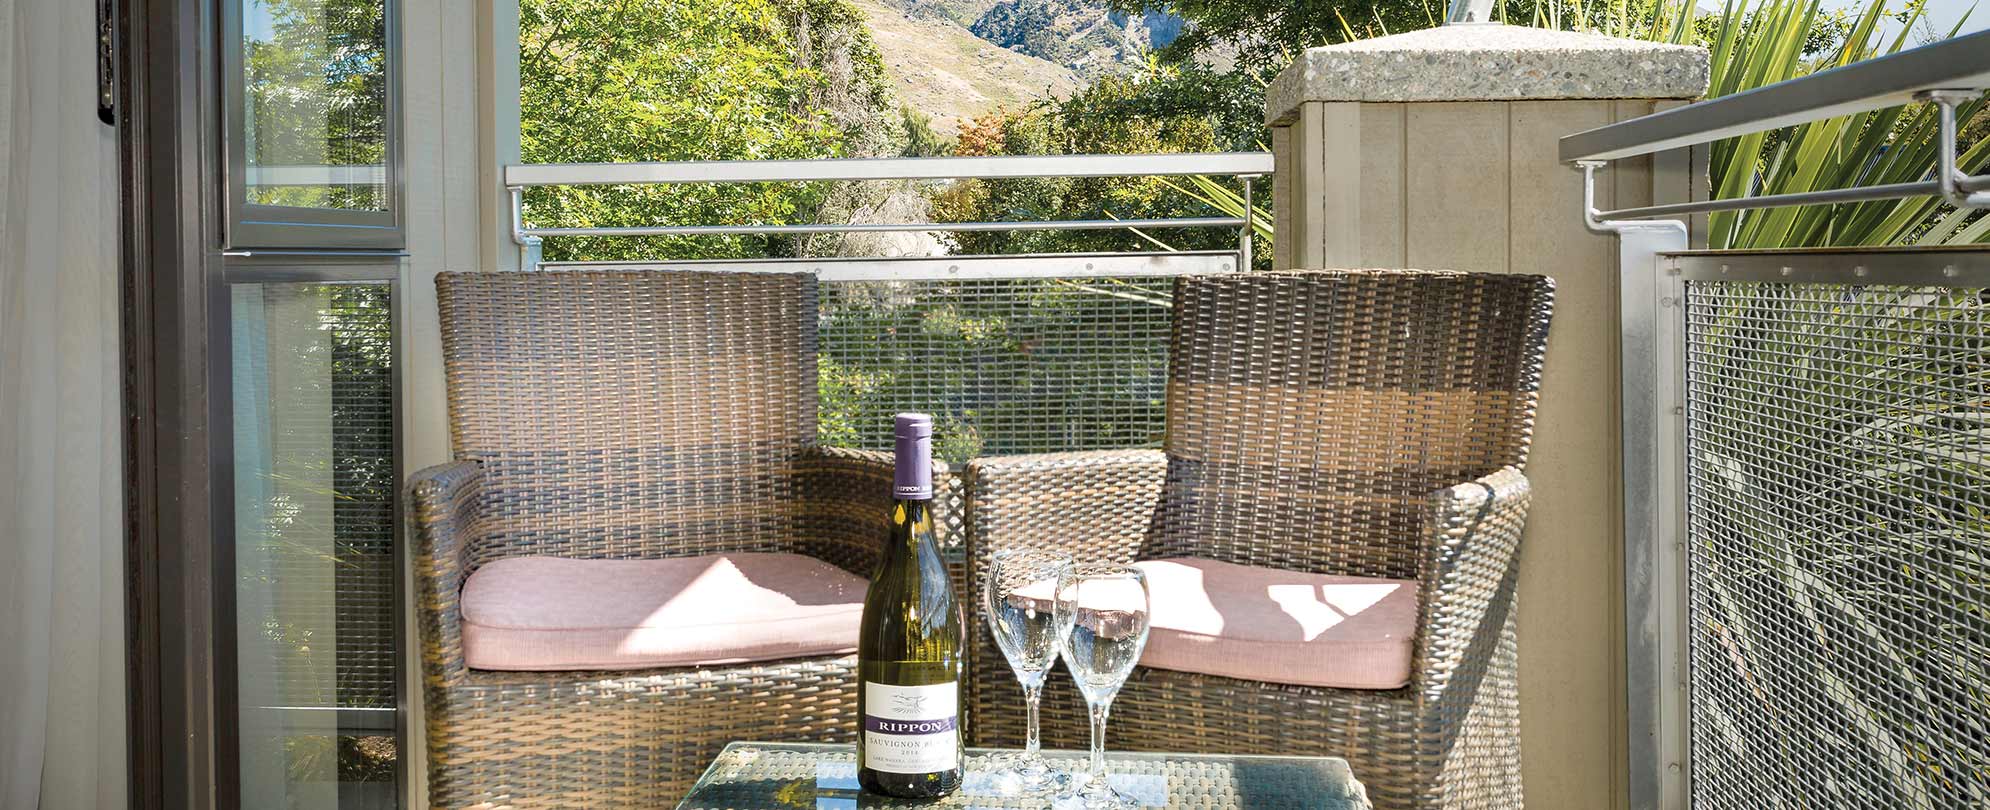 The standard suite balcony has two chairs and a table with a bottle of wine and two wine glasses.